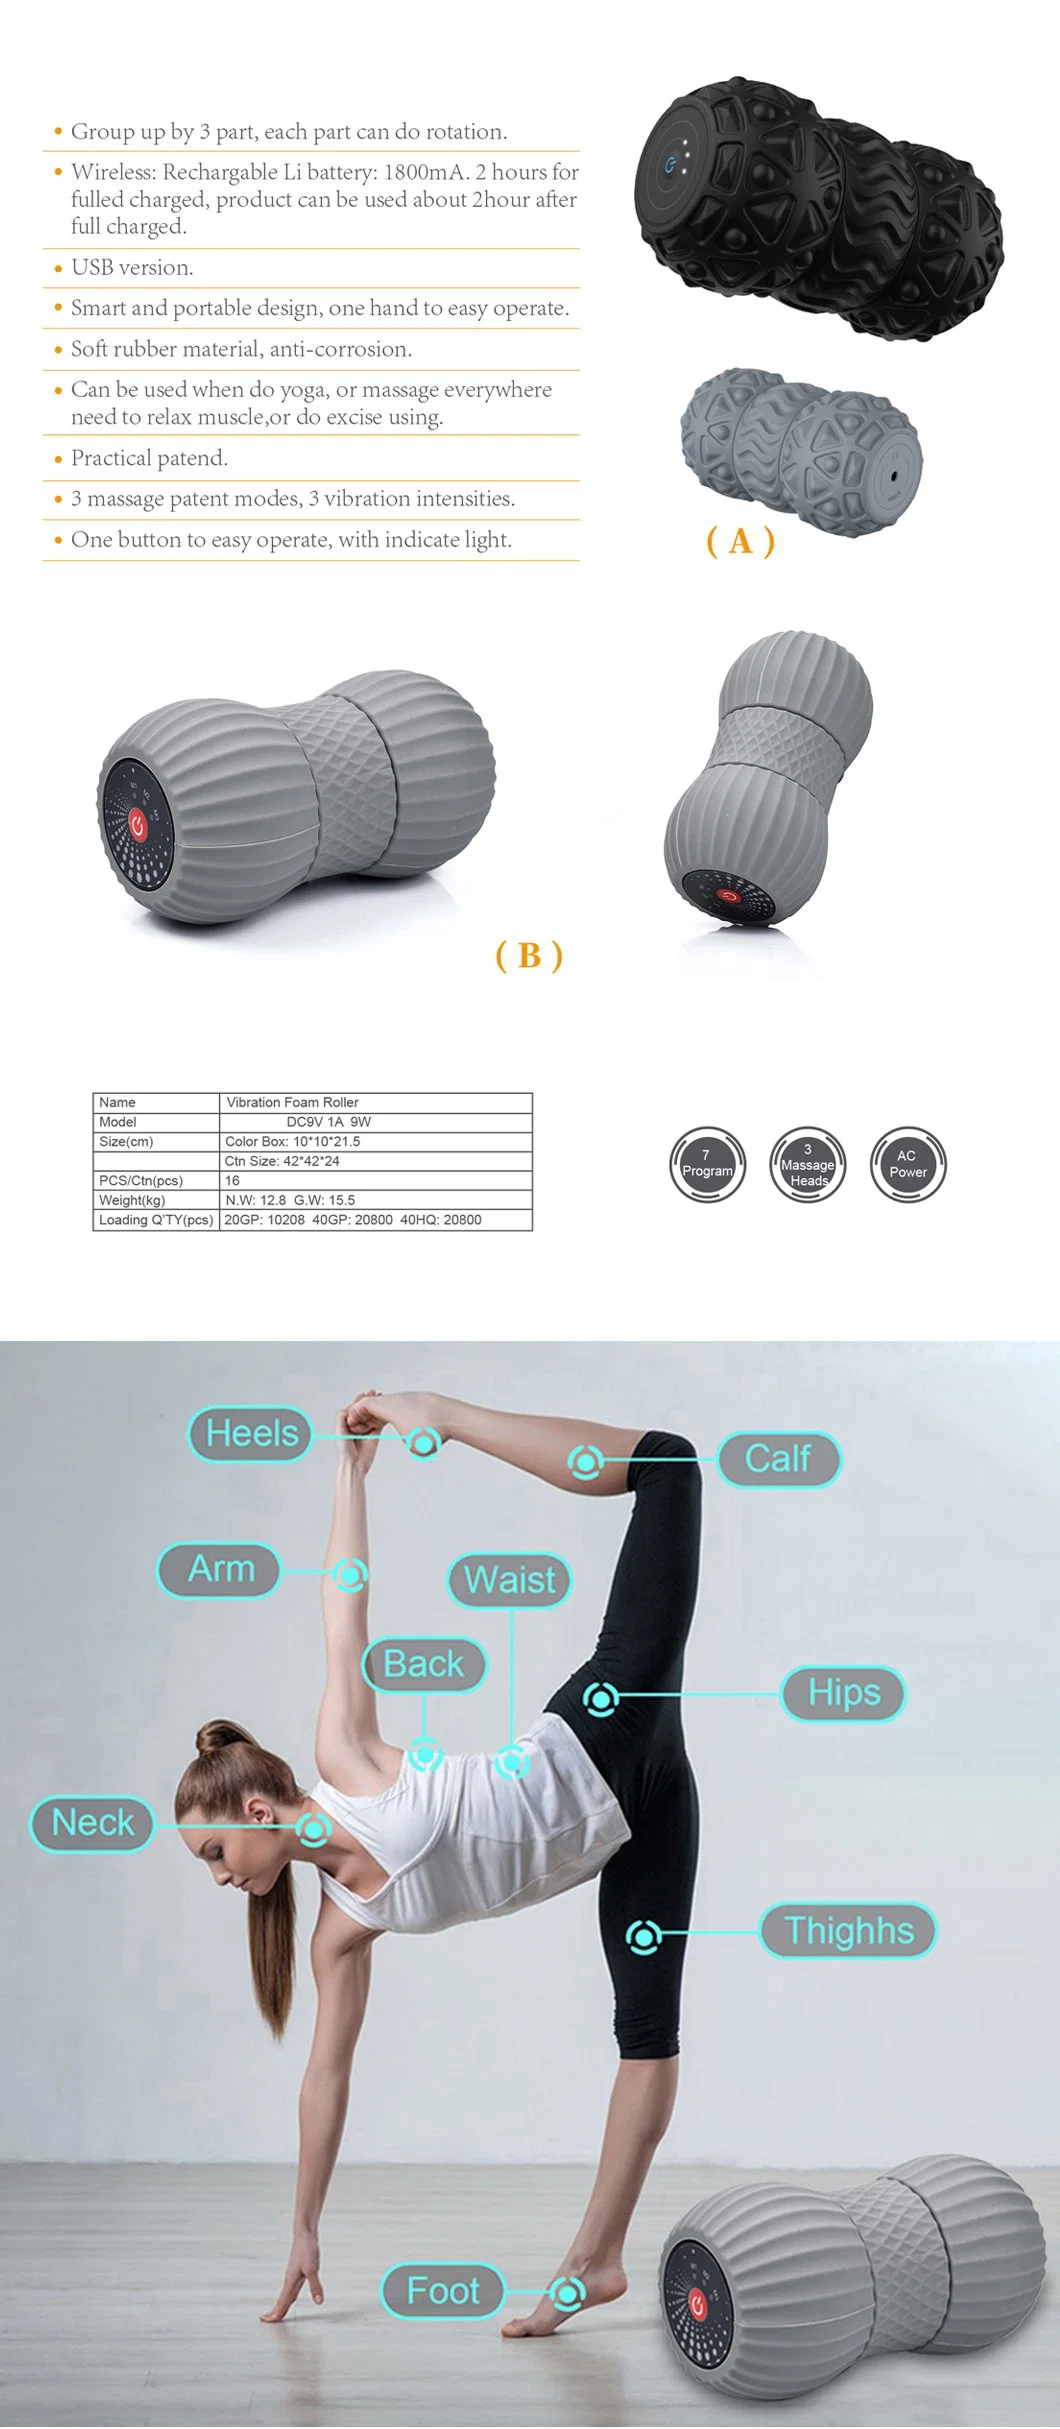 Fitness Hot Sales Gym Equipment Release Vibrating Vibrating Massage Ball Yoga Roller Lacrosse Ball